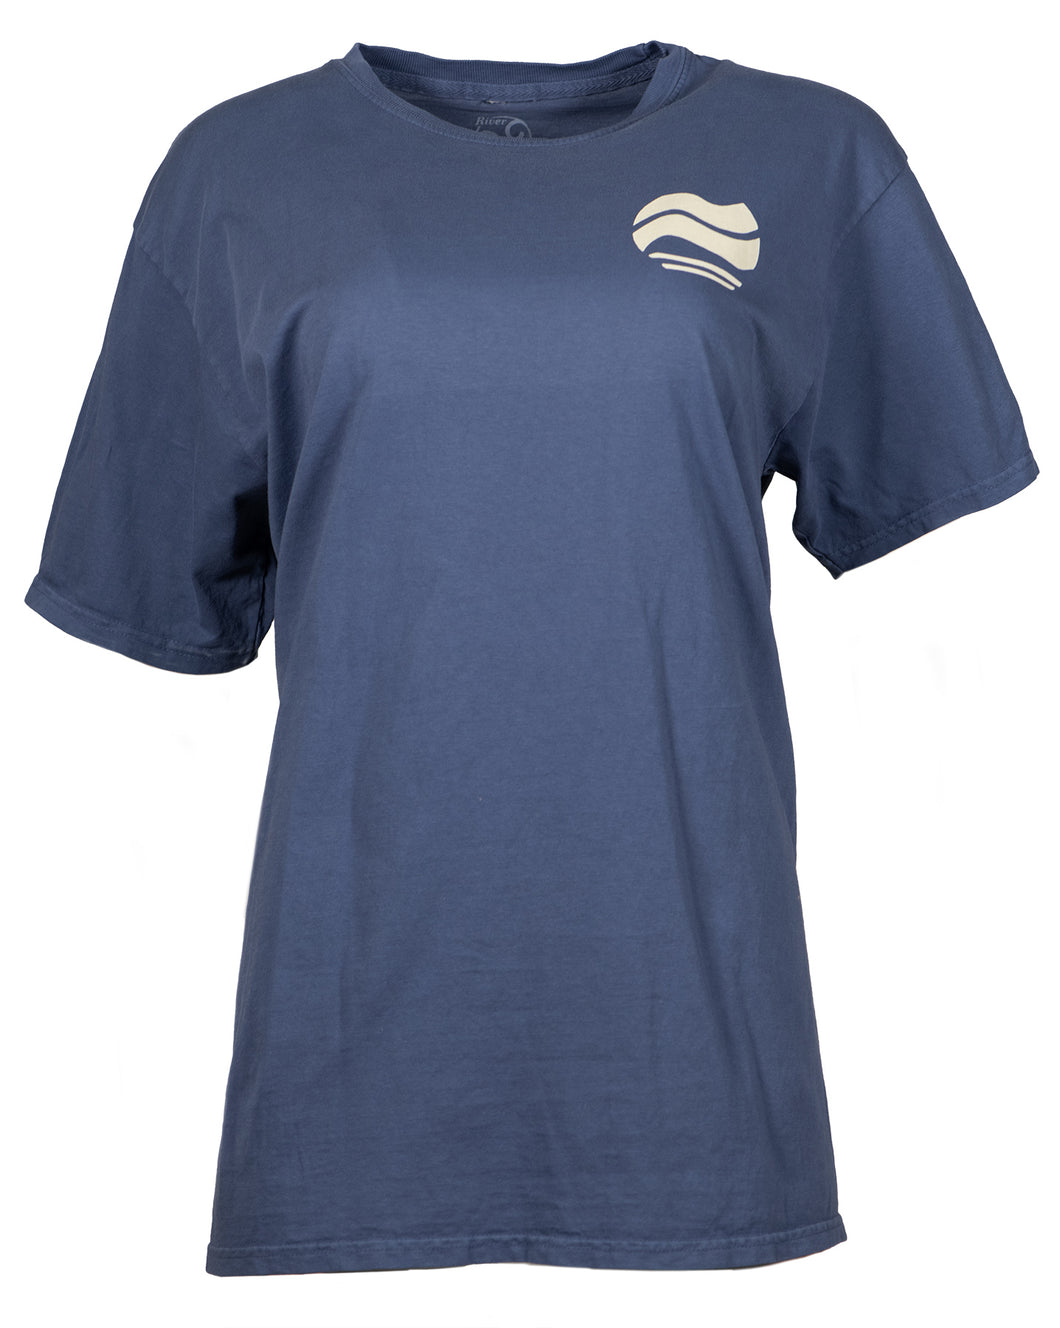 Product Image : Blue - Unisex Cotton Short-Sleeved Crew - small ivory colored abstract wave design over left chest 